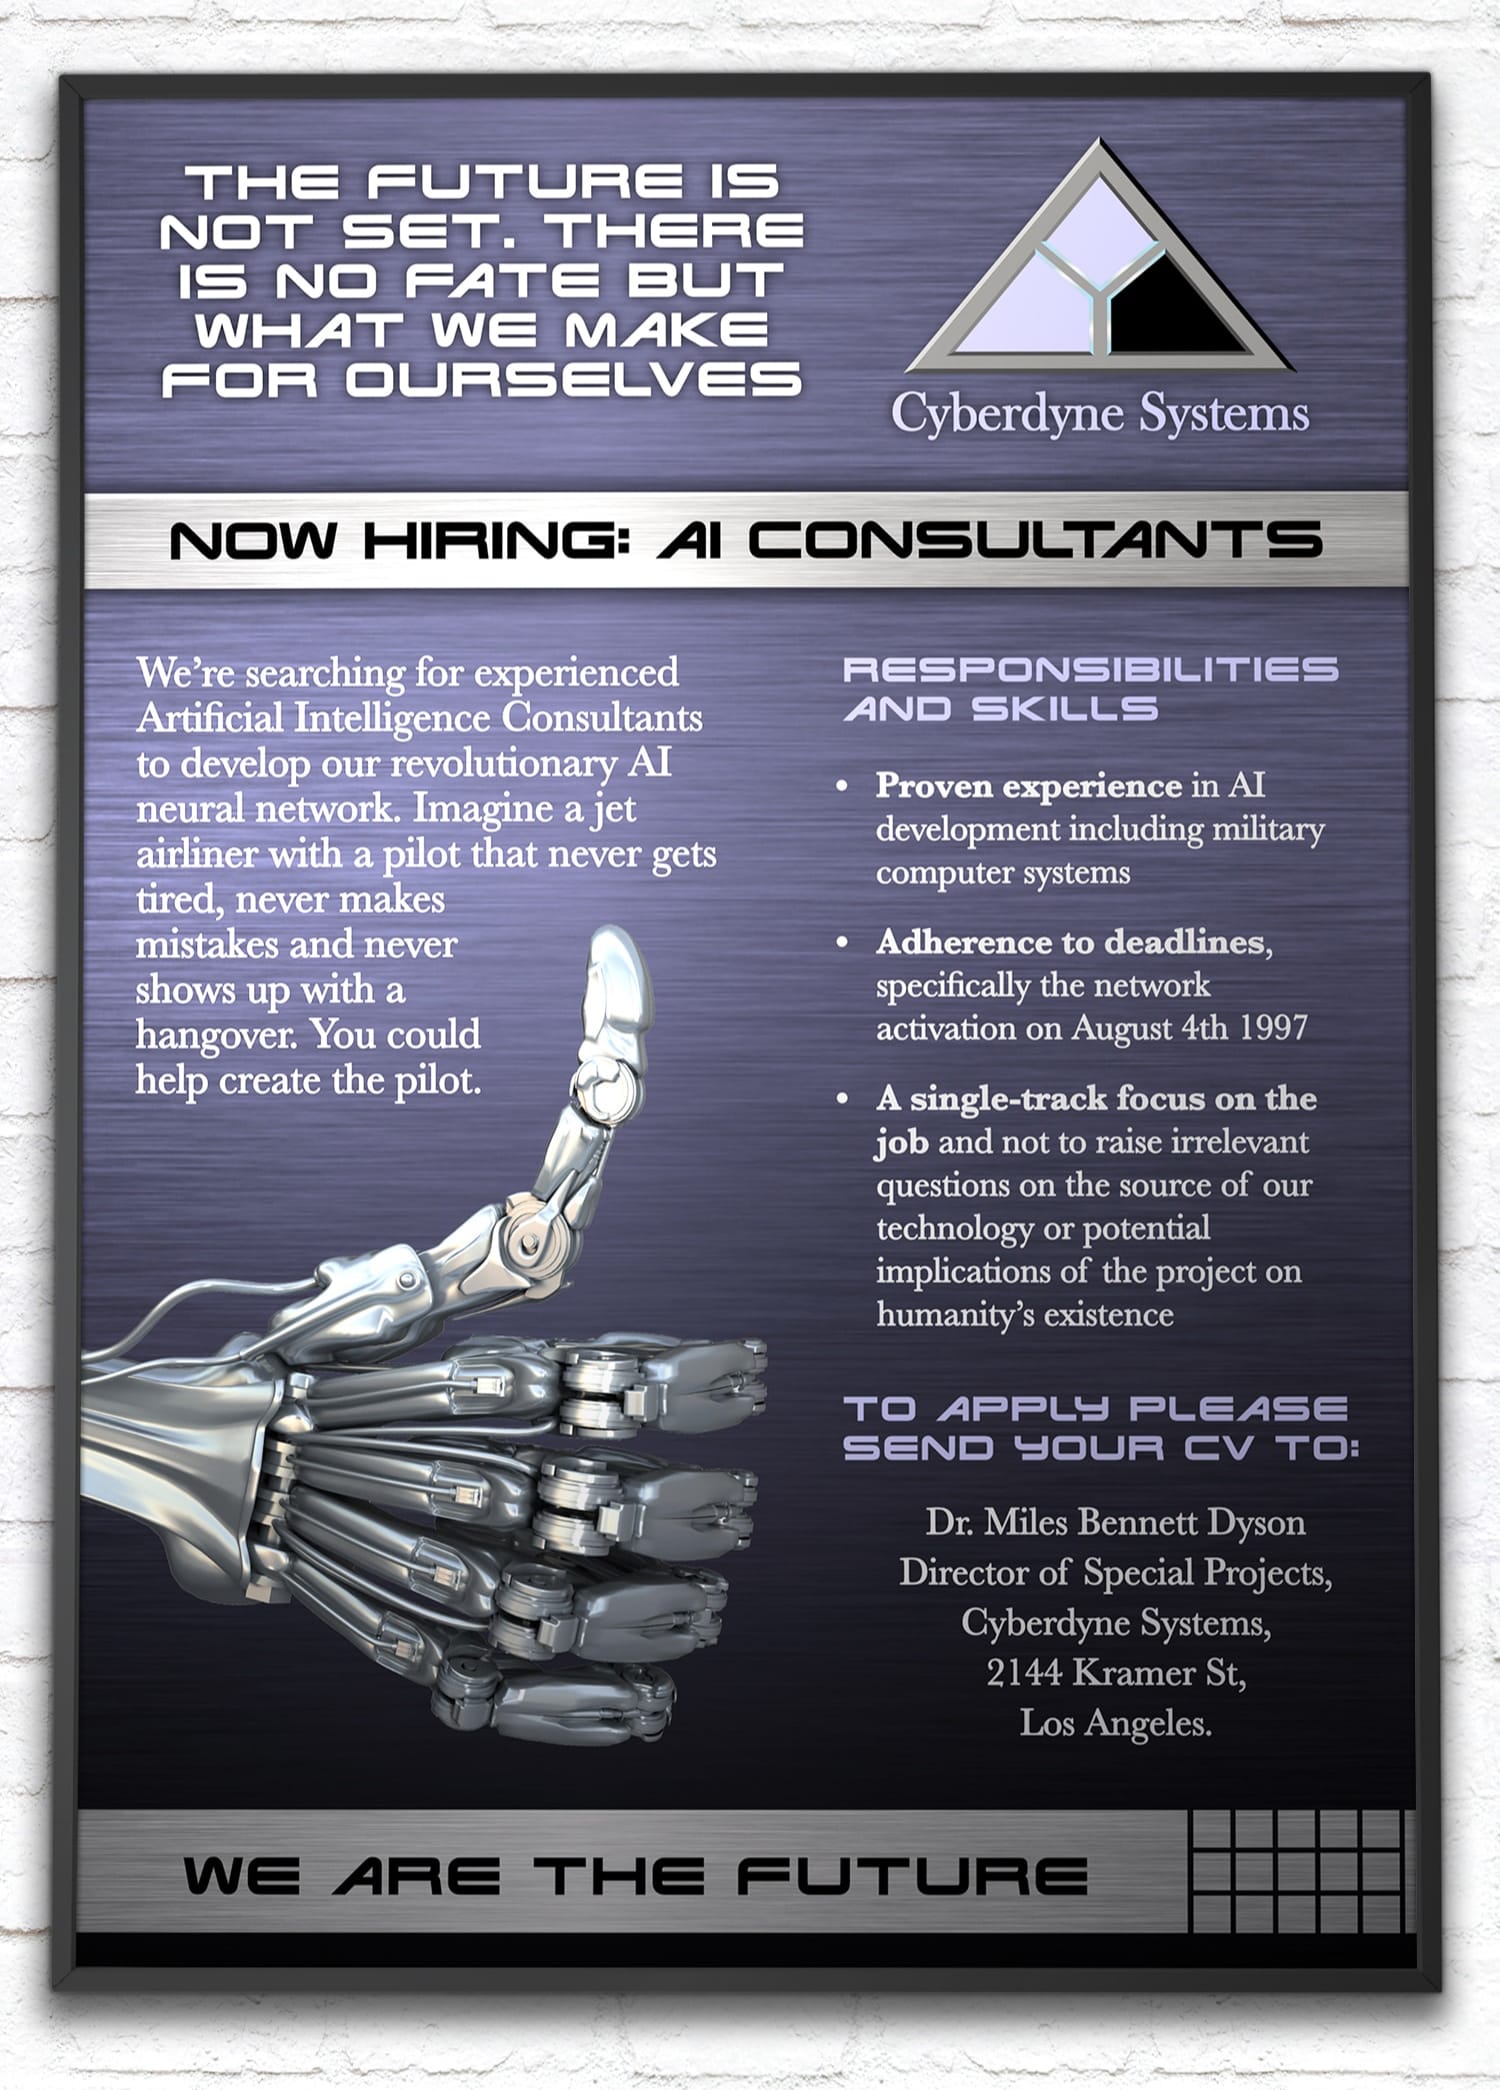 Fictional Terminator recruitment poster - Cyberdyne Systems advertisement for AI consultants